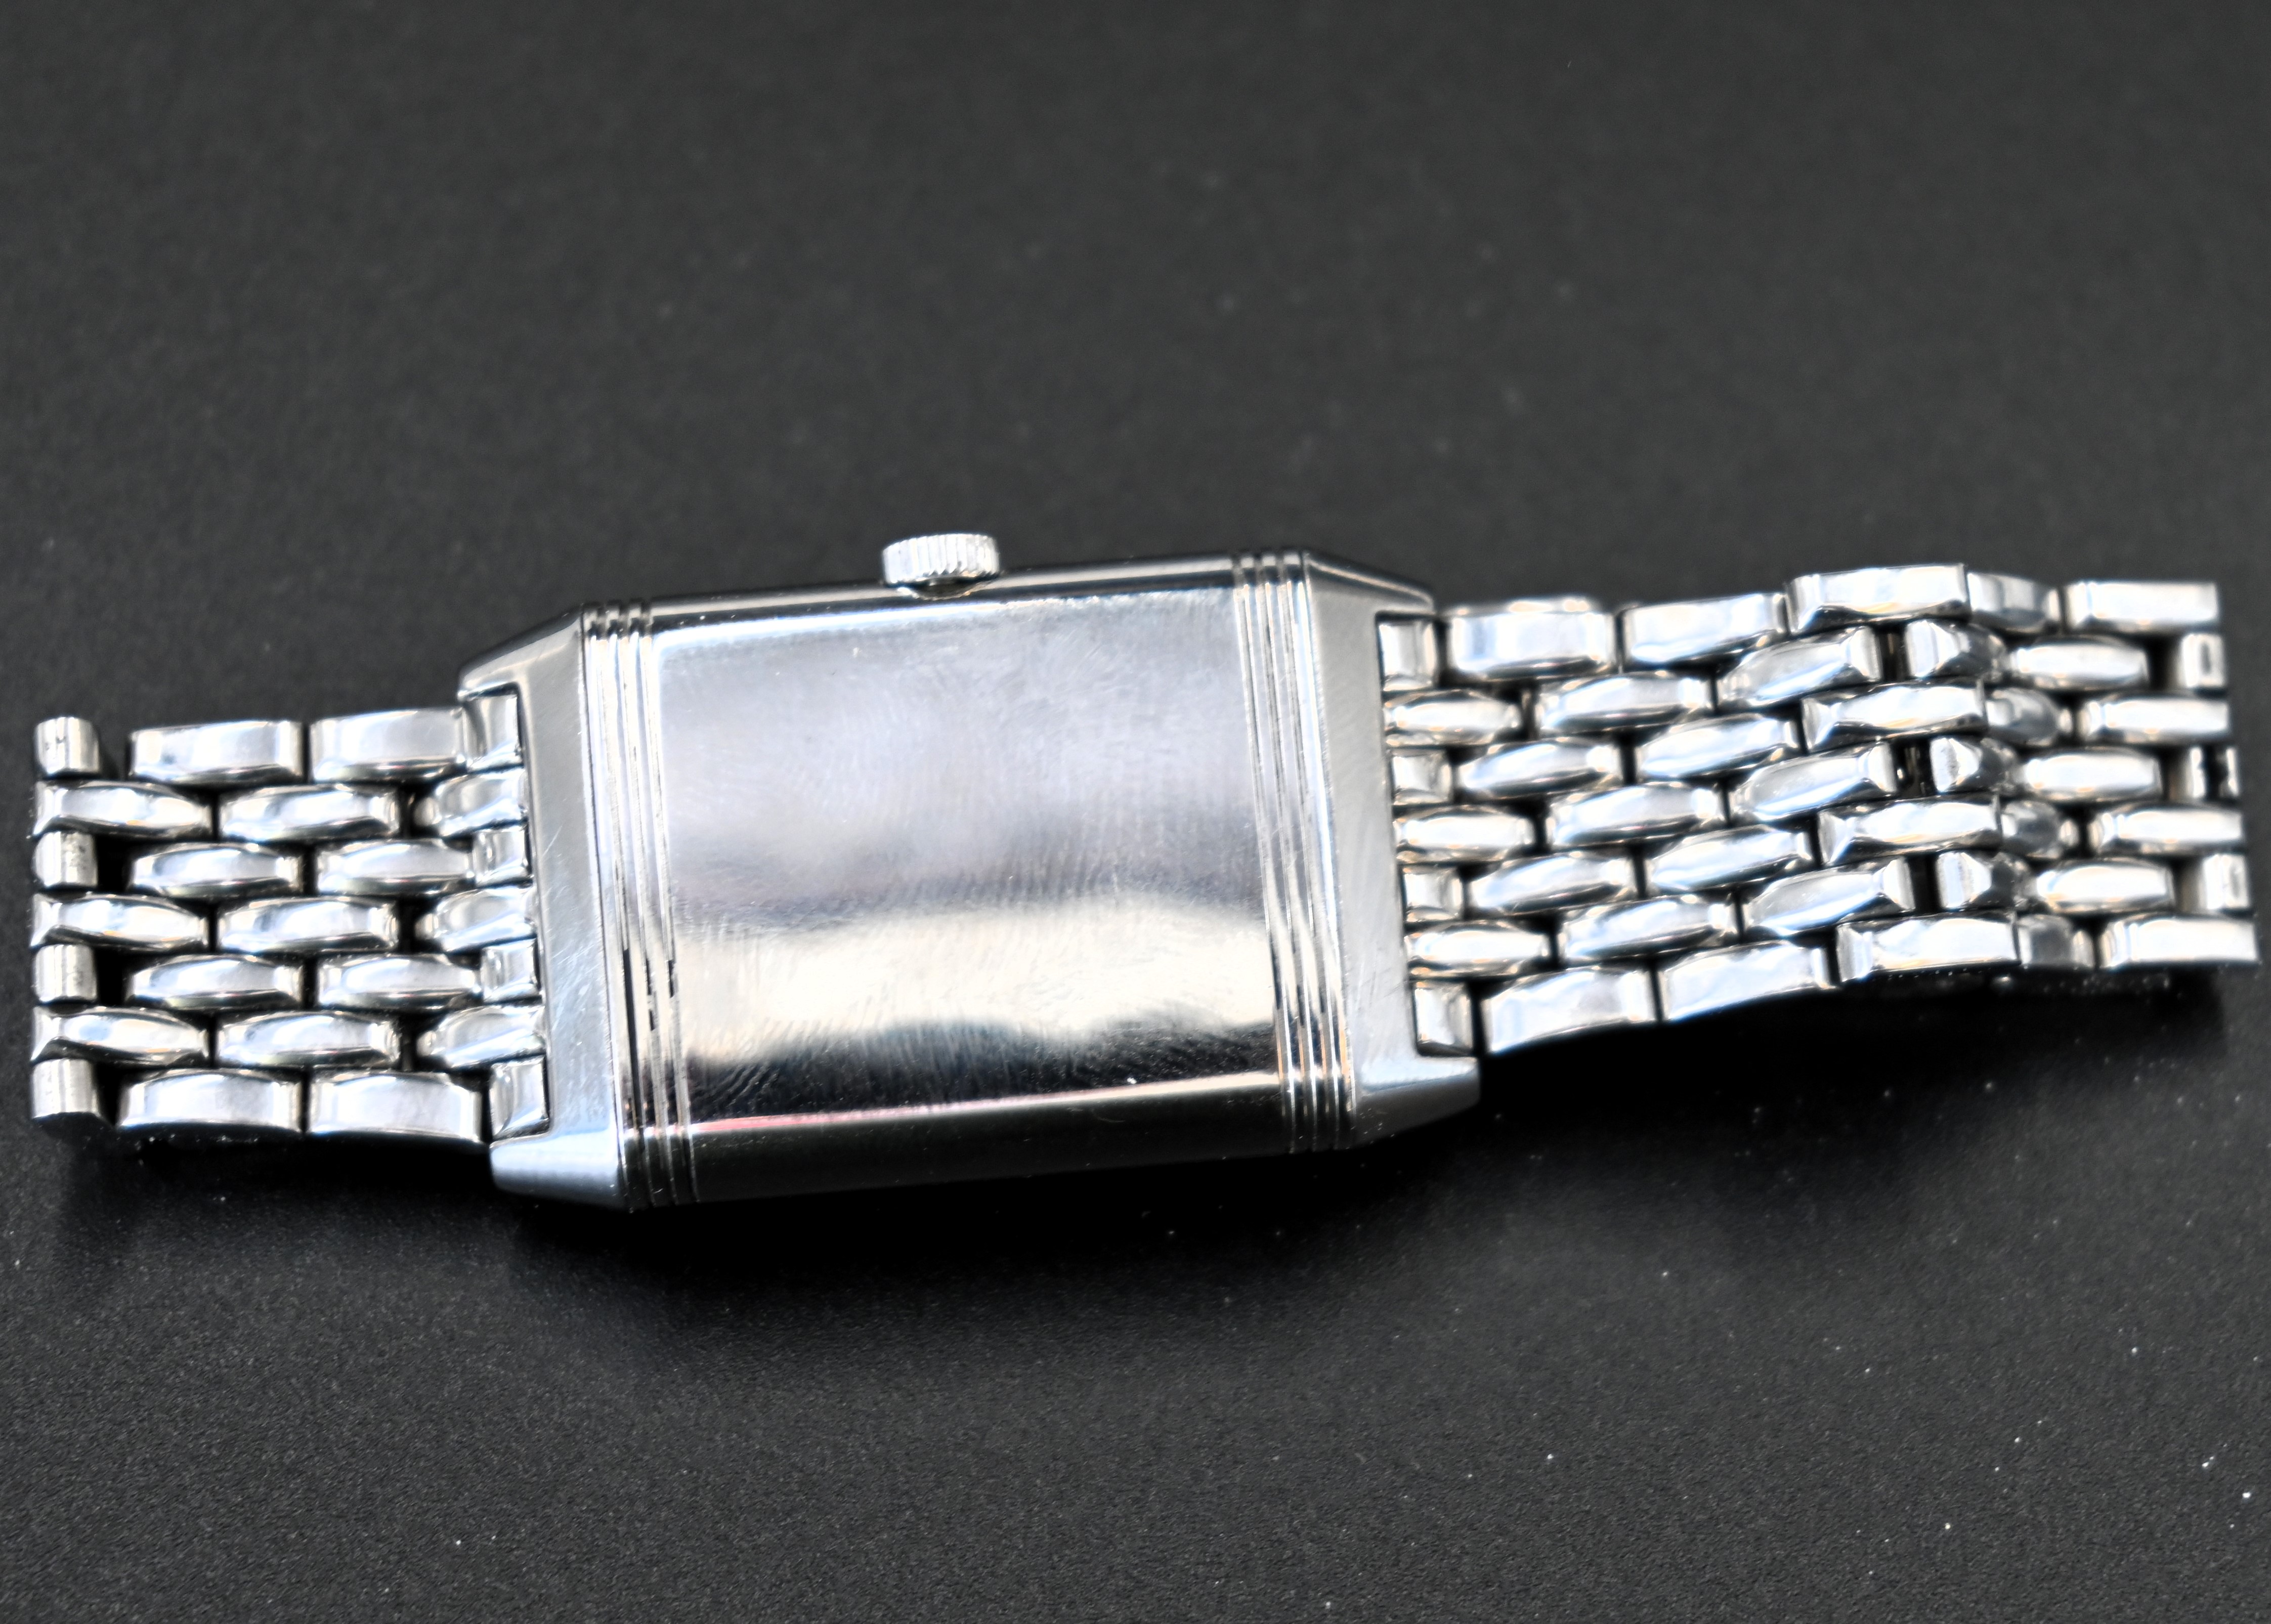 Jaeger-LeCoultre Reverso Grand Taille stainless steel gentleman's wristwatch, reference no. 270. - Image 6 of 7